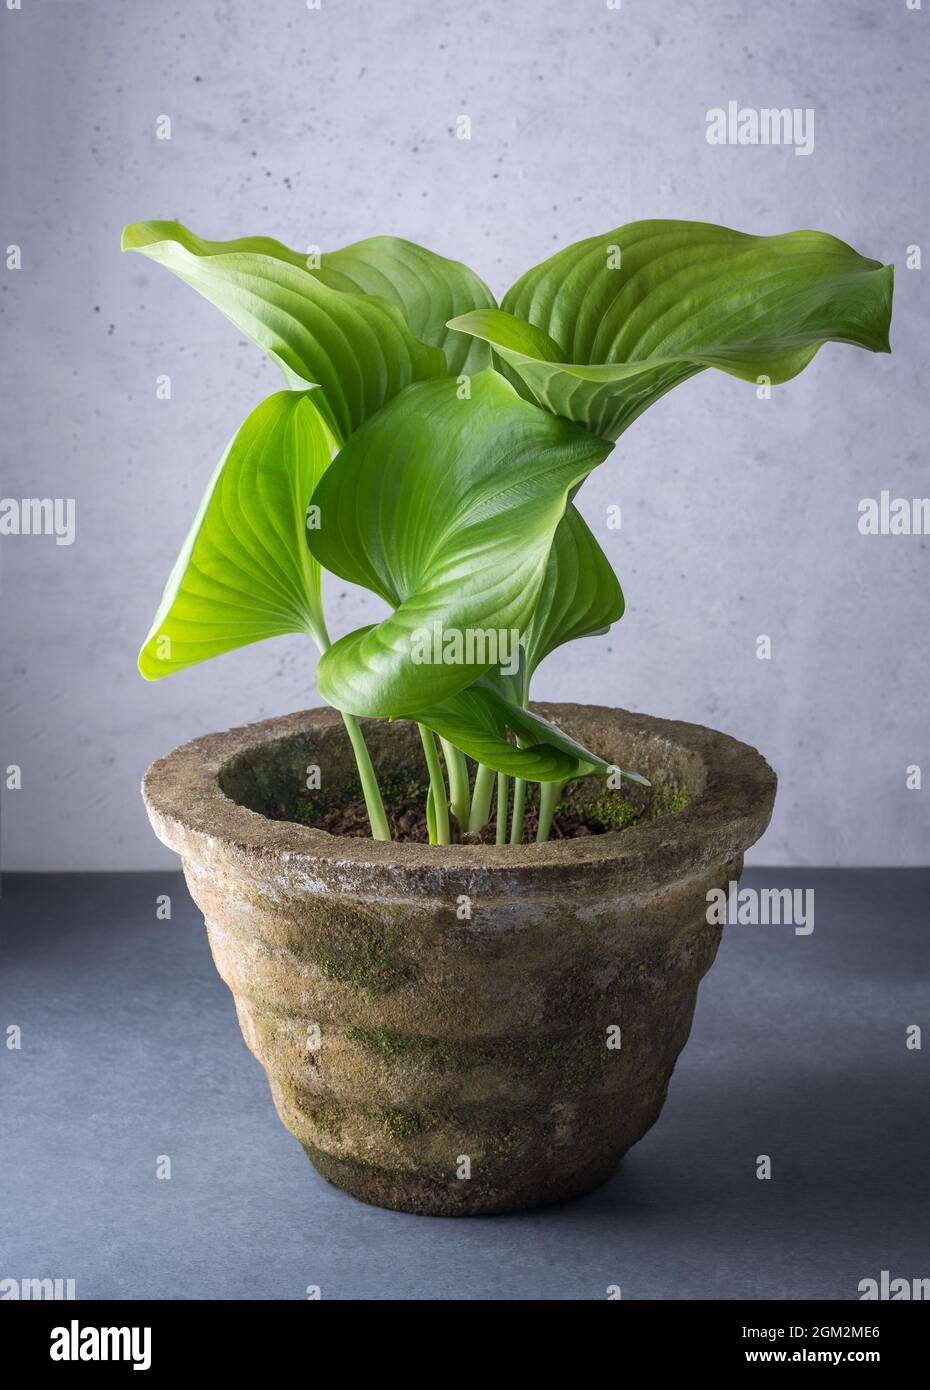 heart shaped leaves green tropical plant on a cement pot Stock Photo